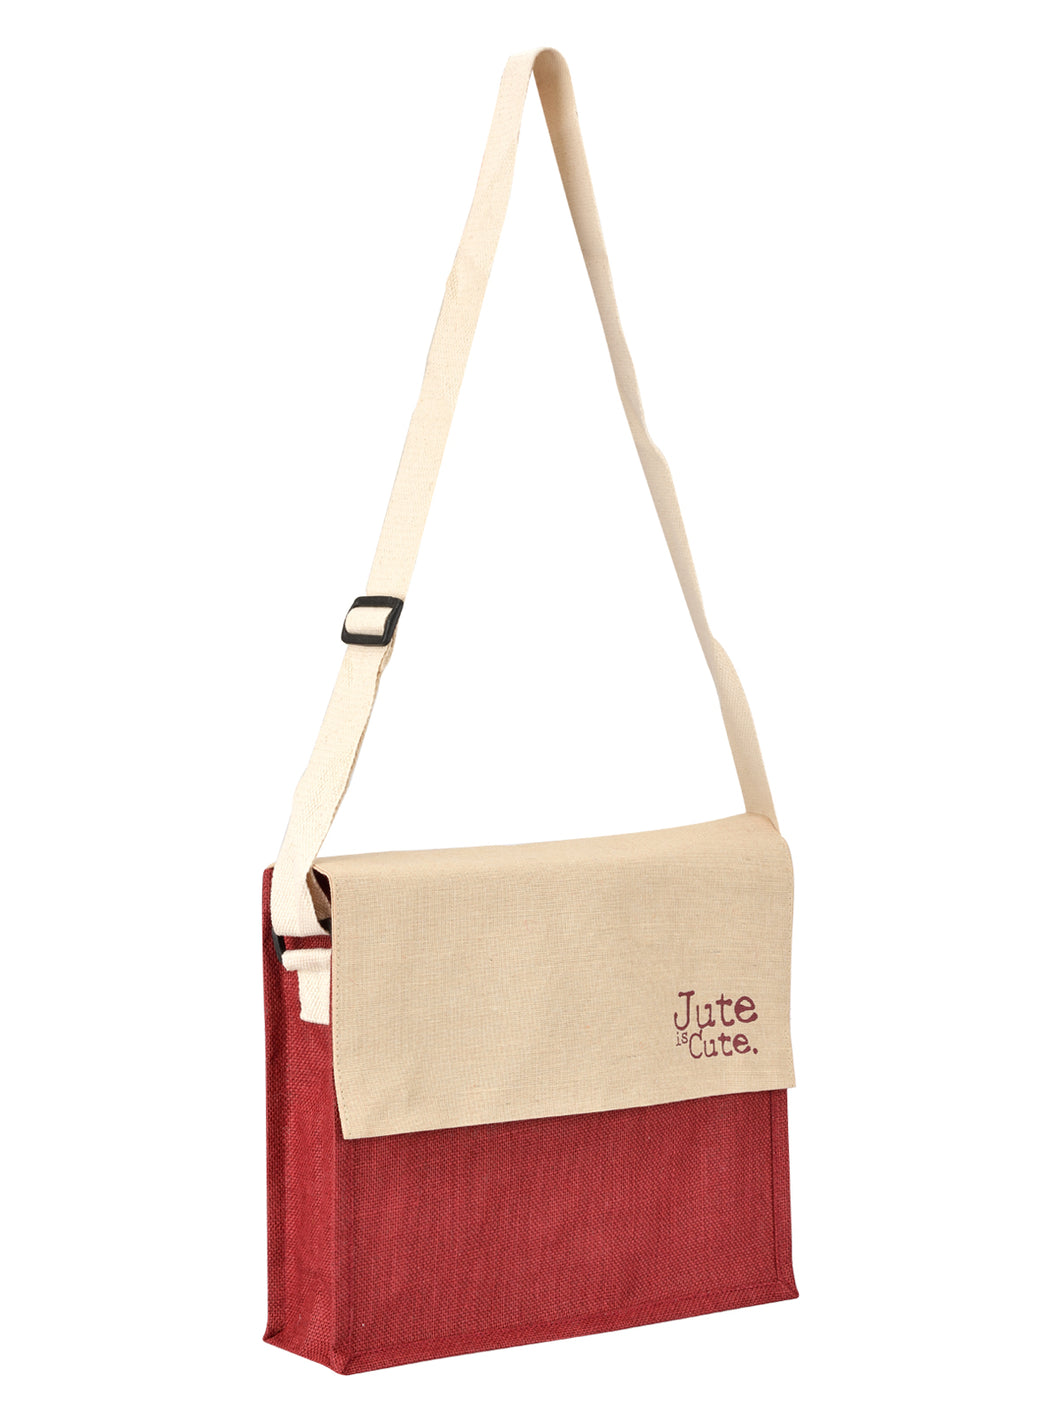 CONFERENCE BAG JUCO FLAP (D-240-MAROON)